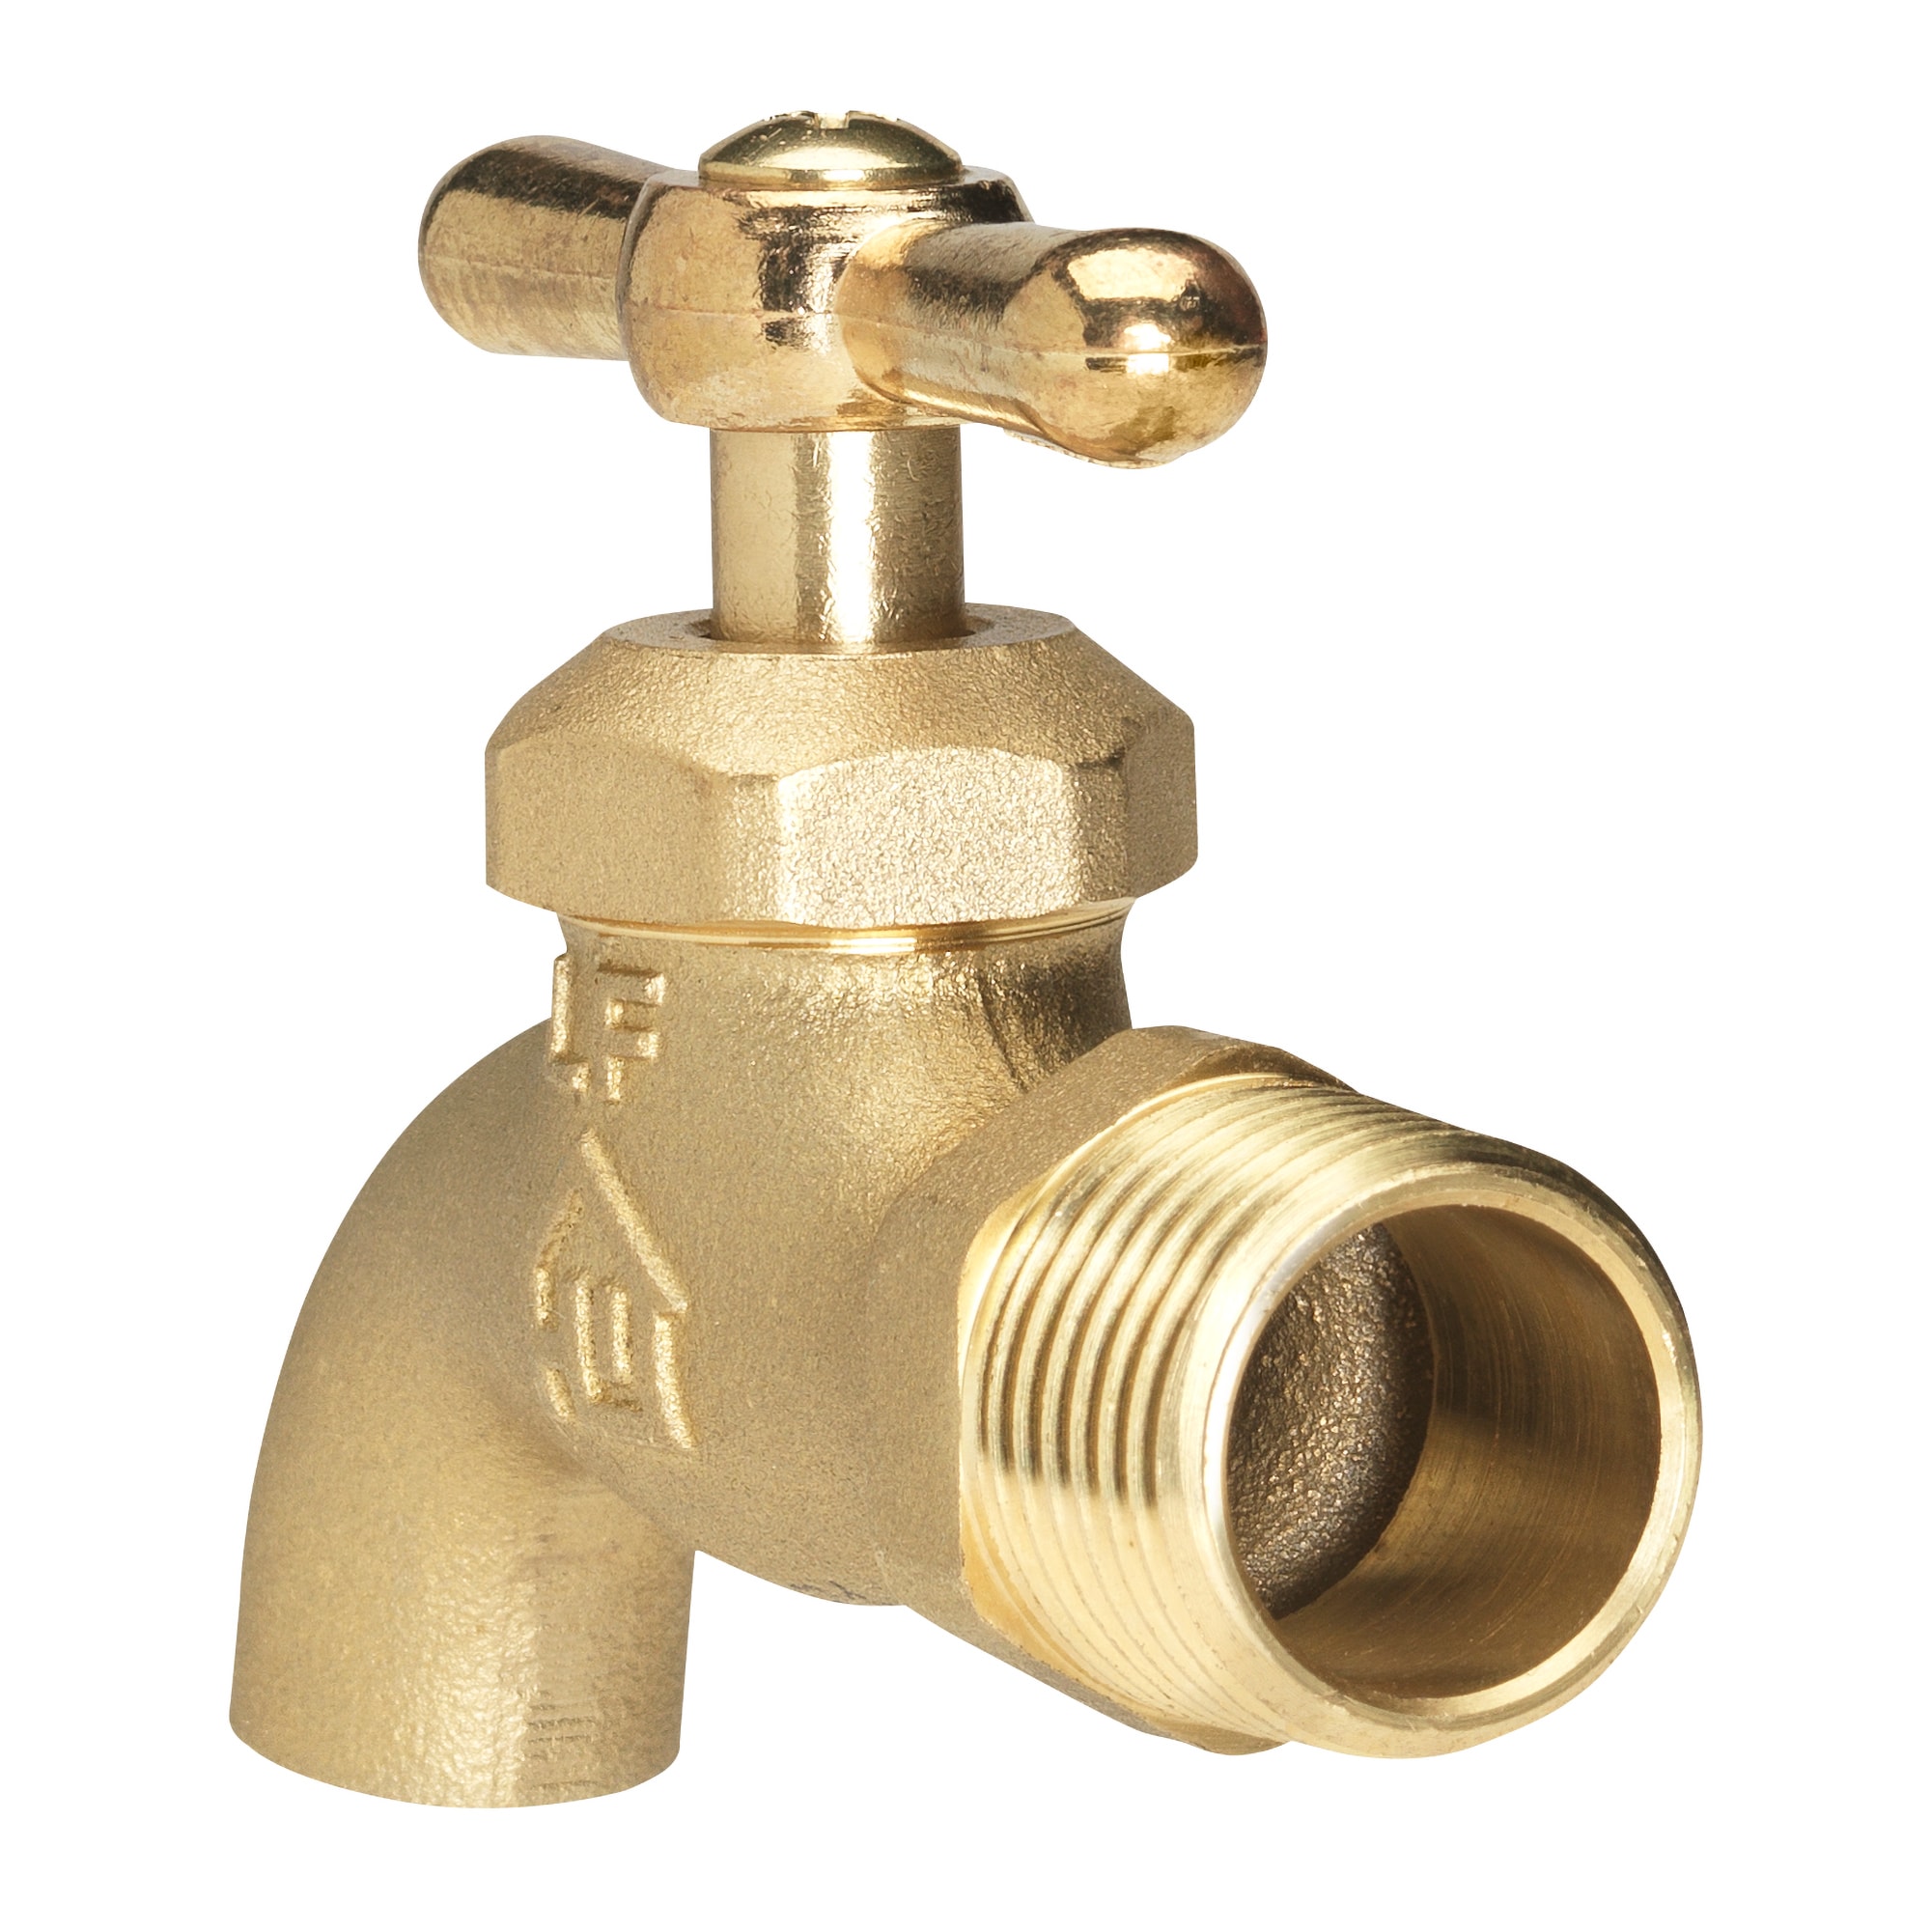 RELIABILT 1/2-in x in Ball department Valve 1/2-in the at Valves Ball Mip